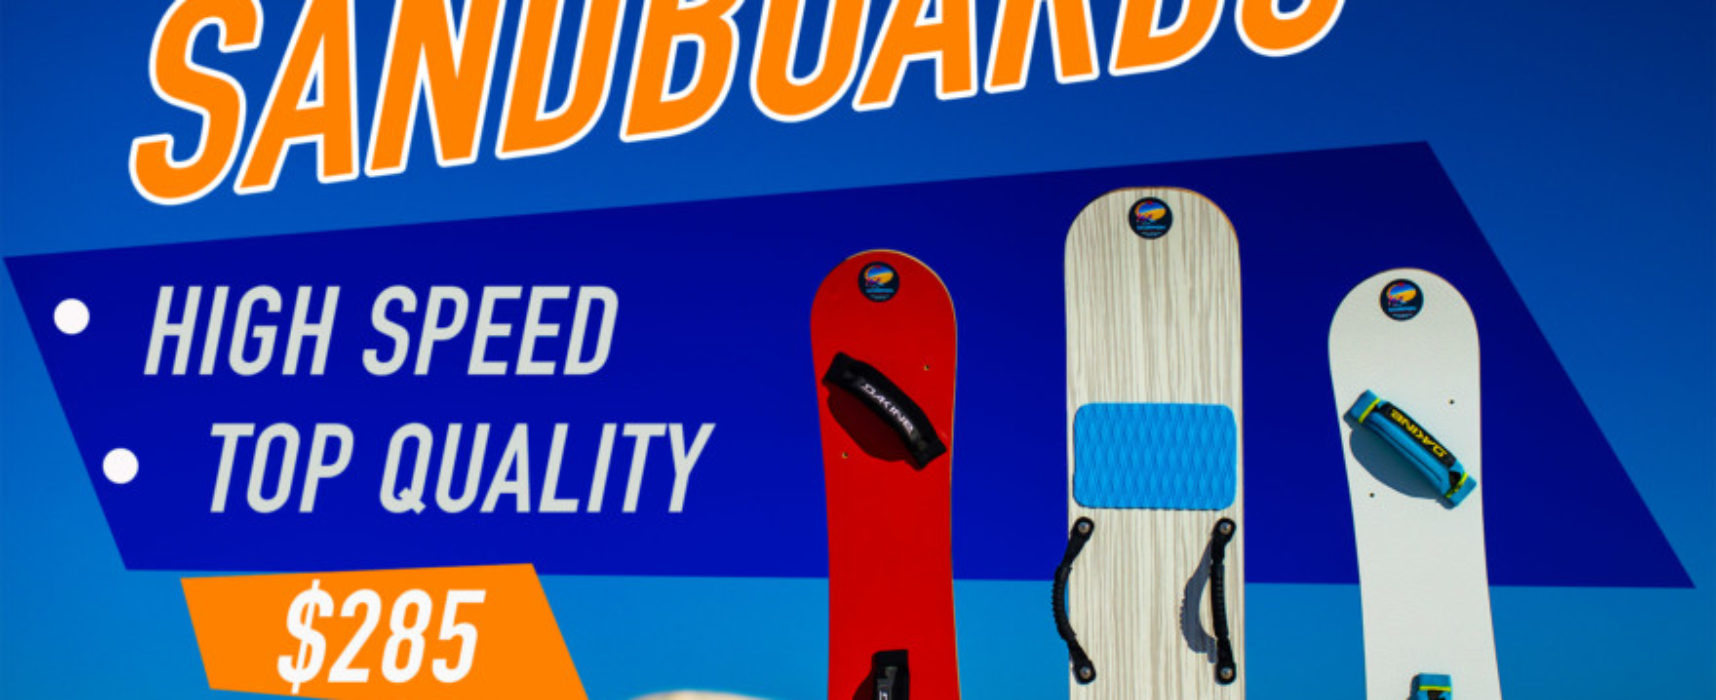 OWN YOUR OWN TOP QUALITY SANDBOARD